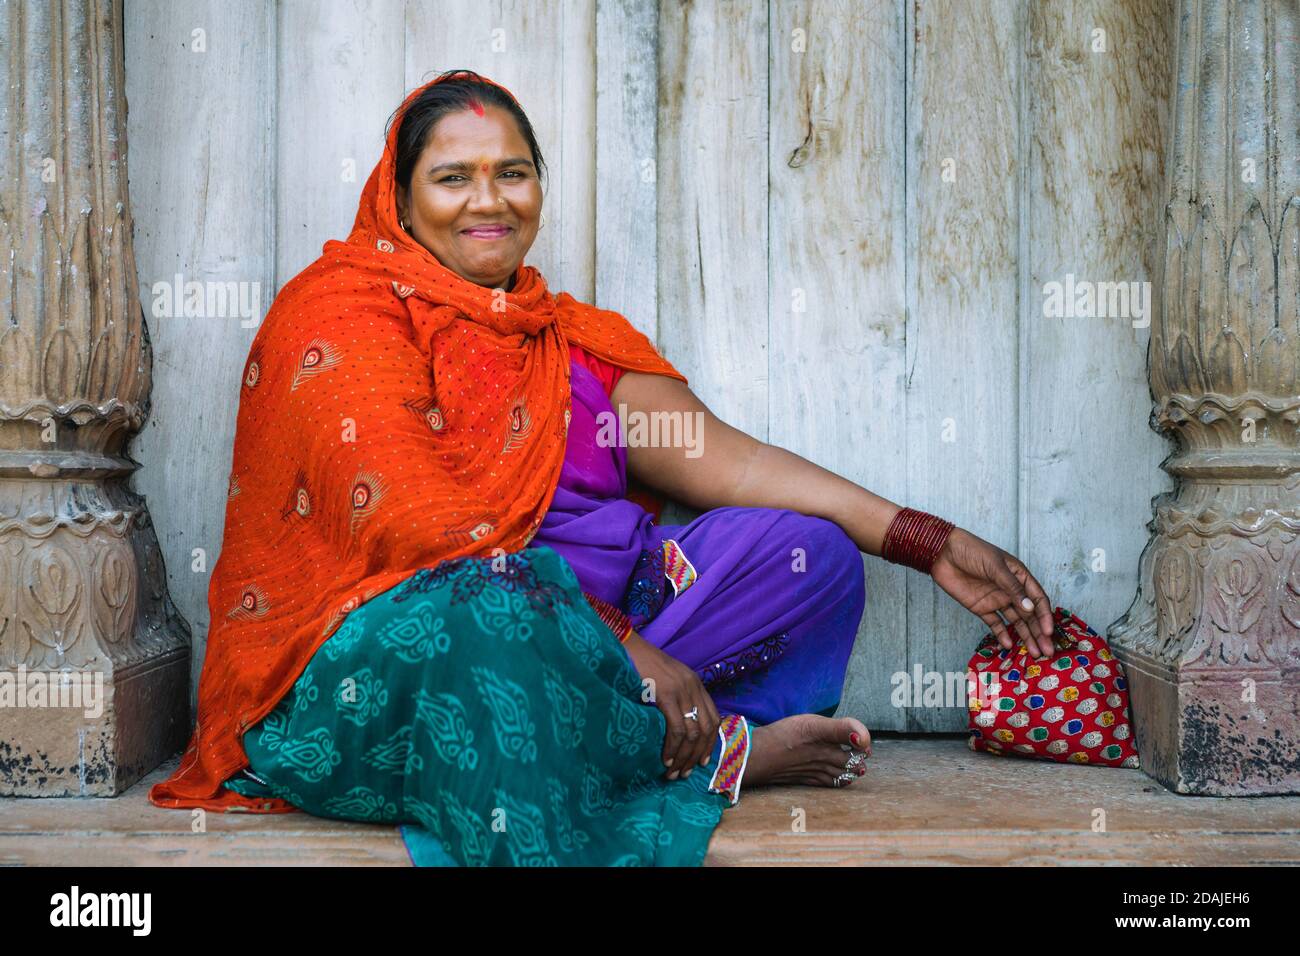 Portrait of Indian woman with a beautiful smile in colorful clothes employed as a sweeper on October 05, 2019 in Vrindavan, Uttar Pradesh, India. Stock Photo